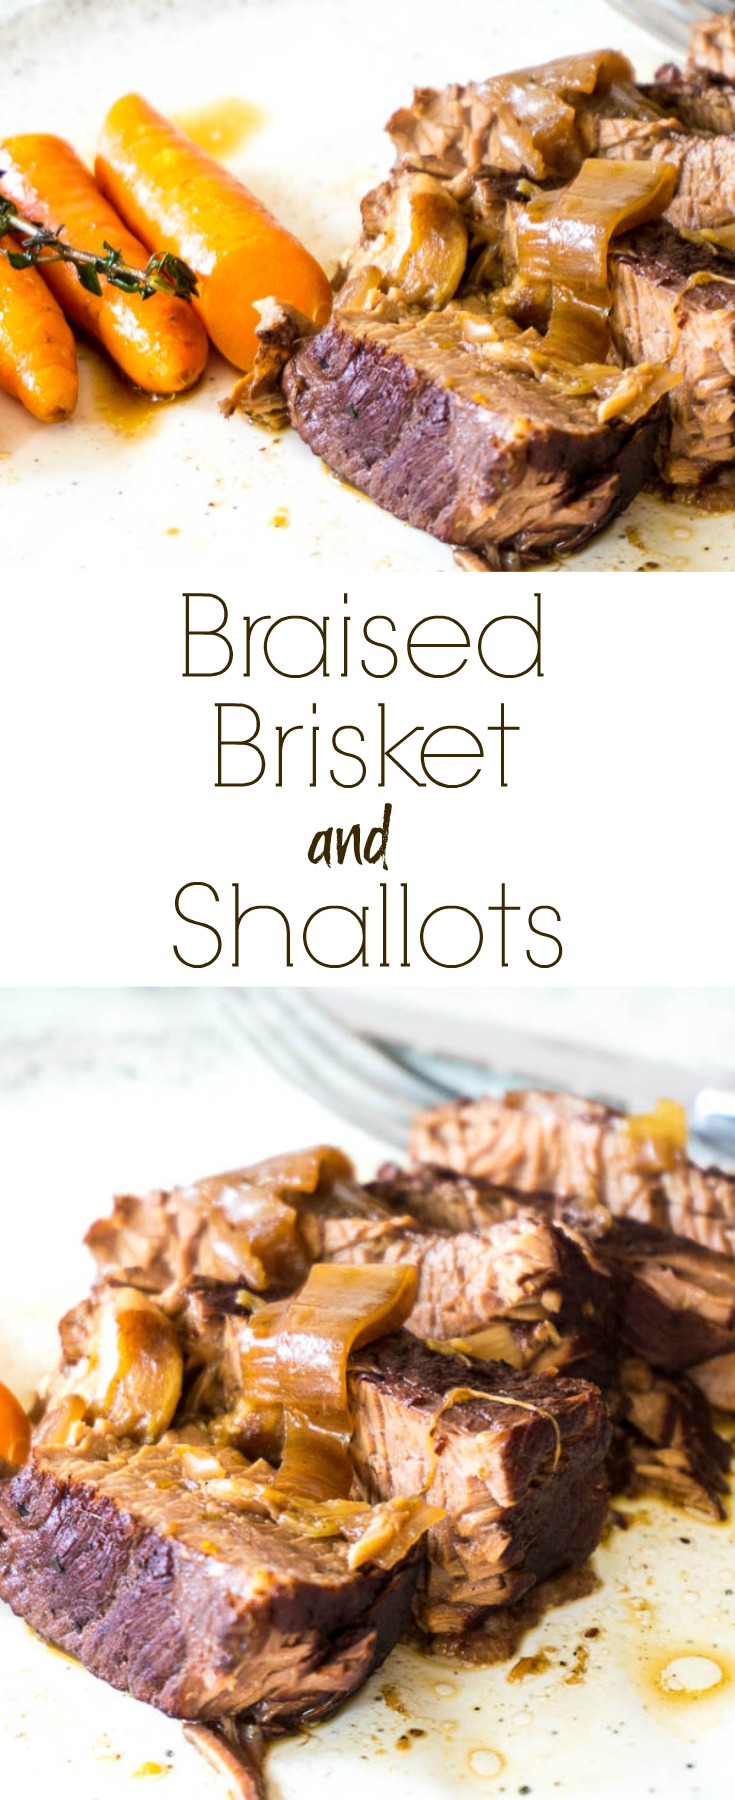 braised brisket and shallots